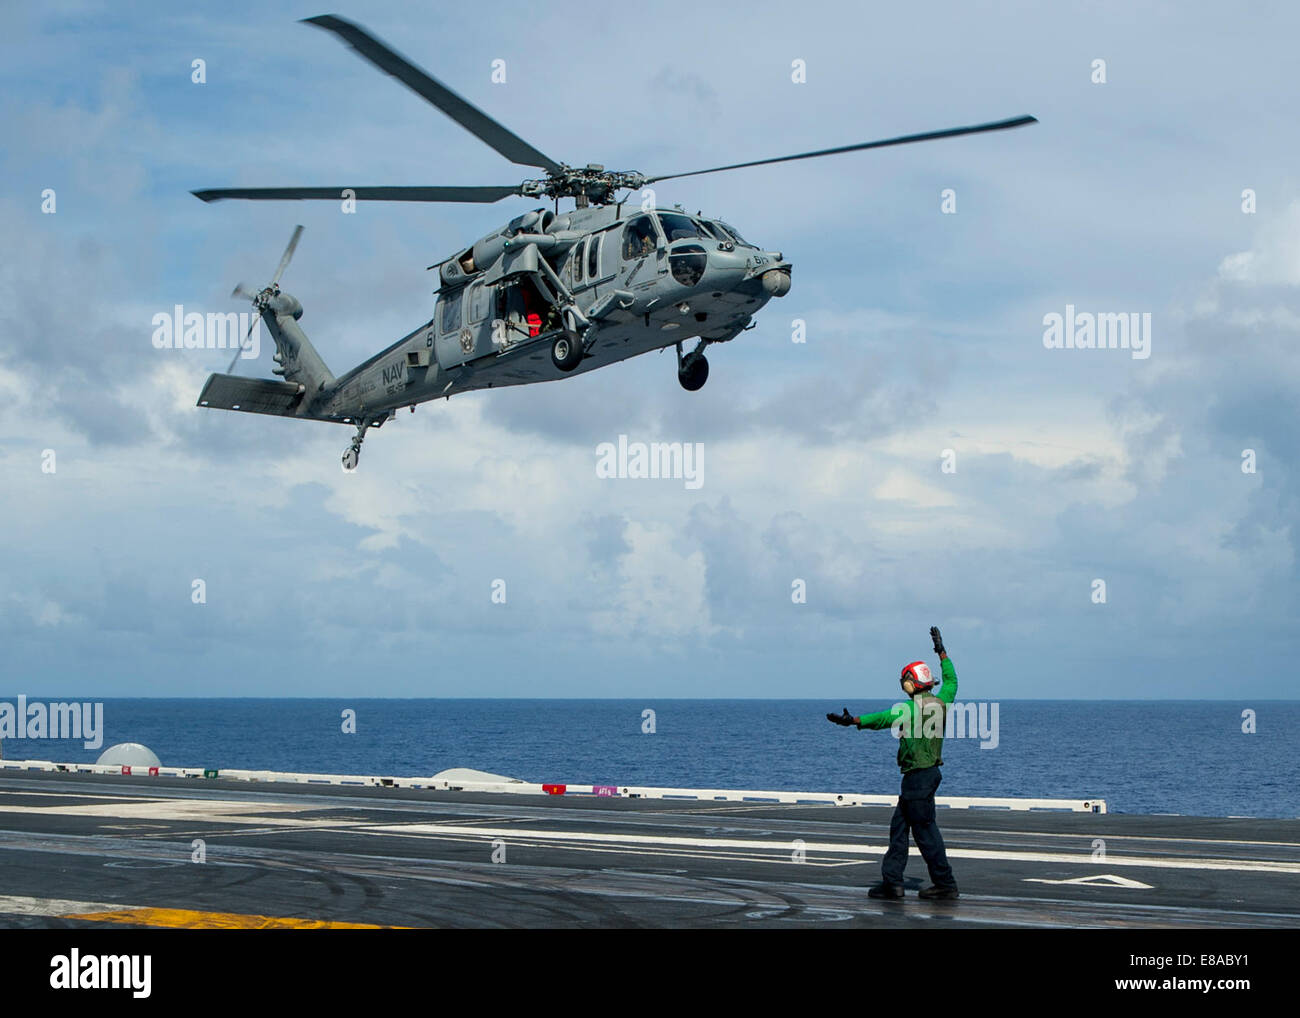 U.S. Navy Aviation Machinist?s Mate 3rd Class Alex Lasan signals the pilots of an MH-60S Seahawk helicopter assigned to Helicopter Sea Combat Squadron (HSC) 15 to land on the flight deck of the aircraft carrier USS Carl Vinson (CVN 70) Sept. 22, 2014, in Stock Photo